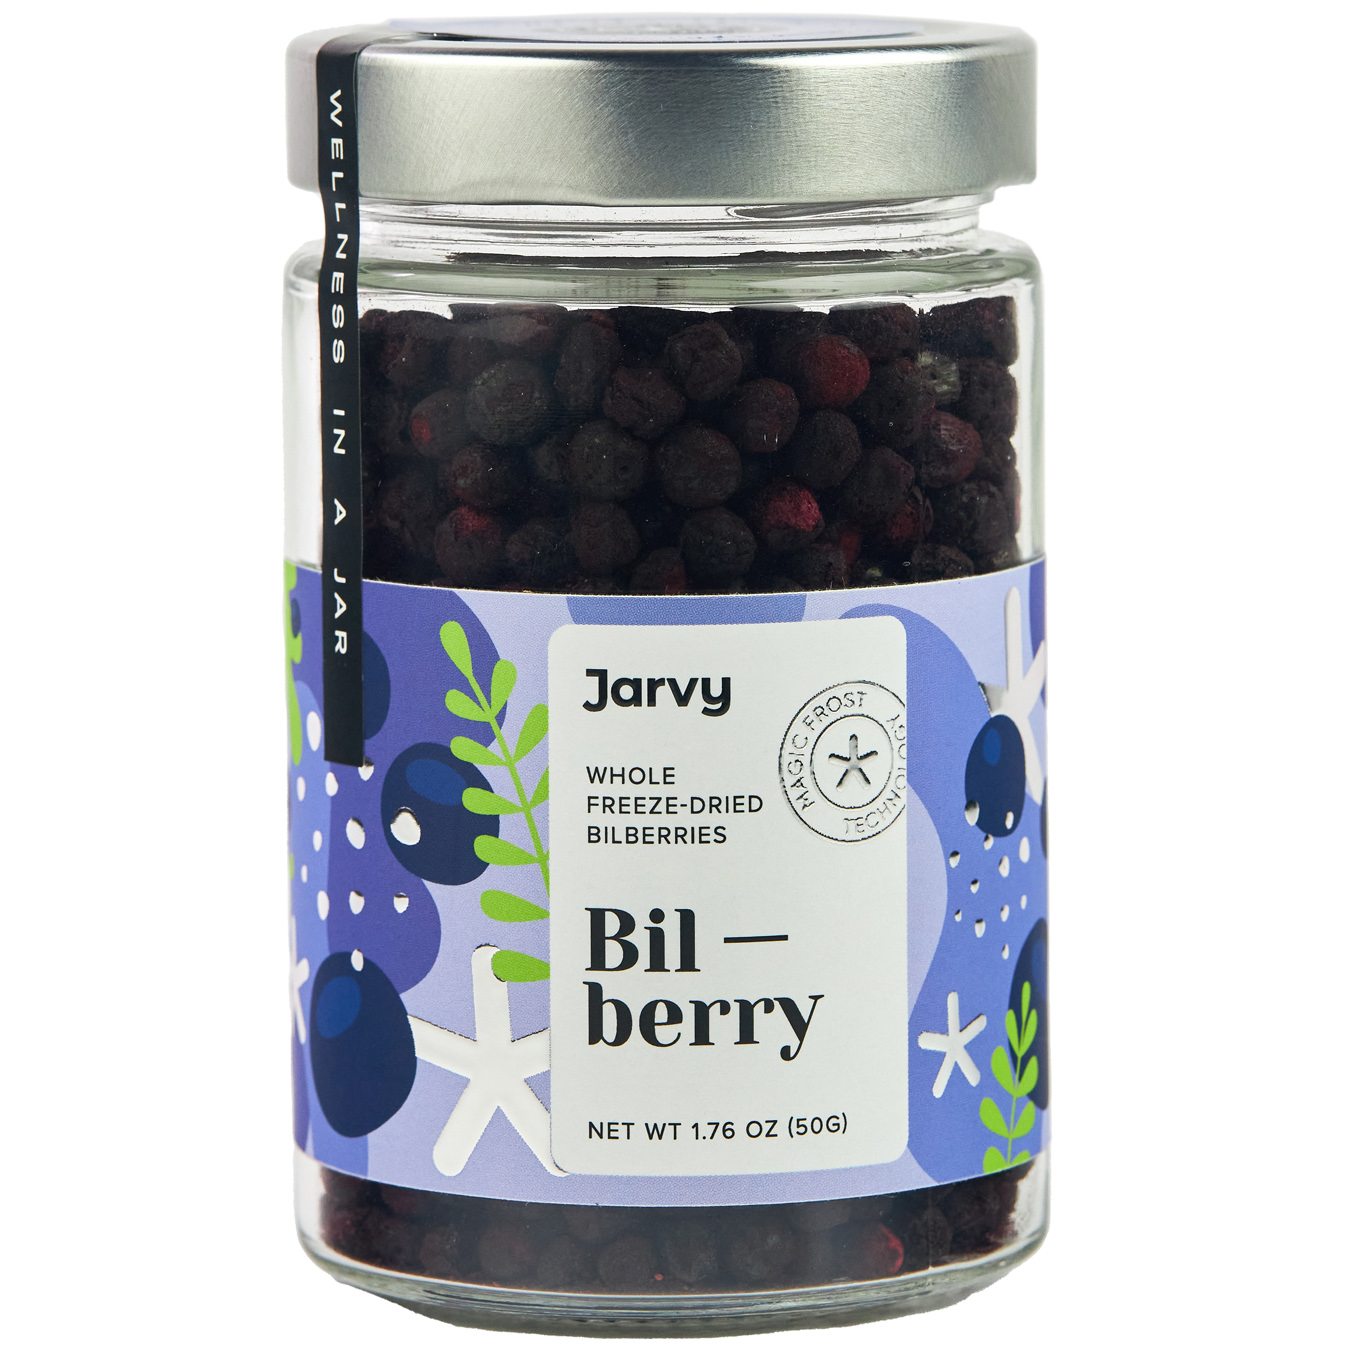 Blueberry Jarvy sublimated 50g